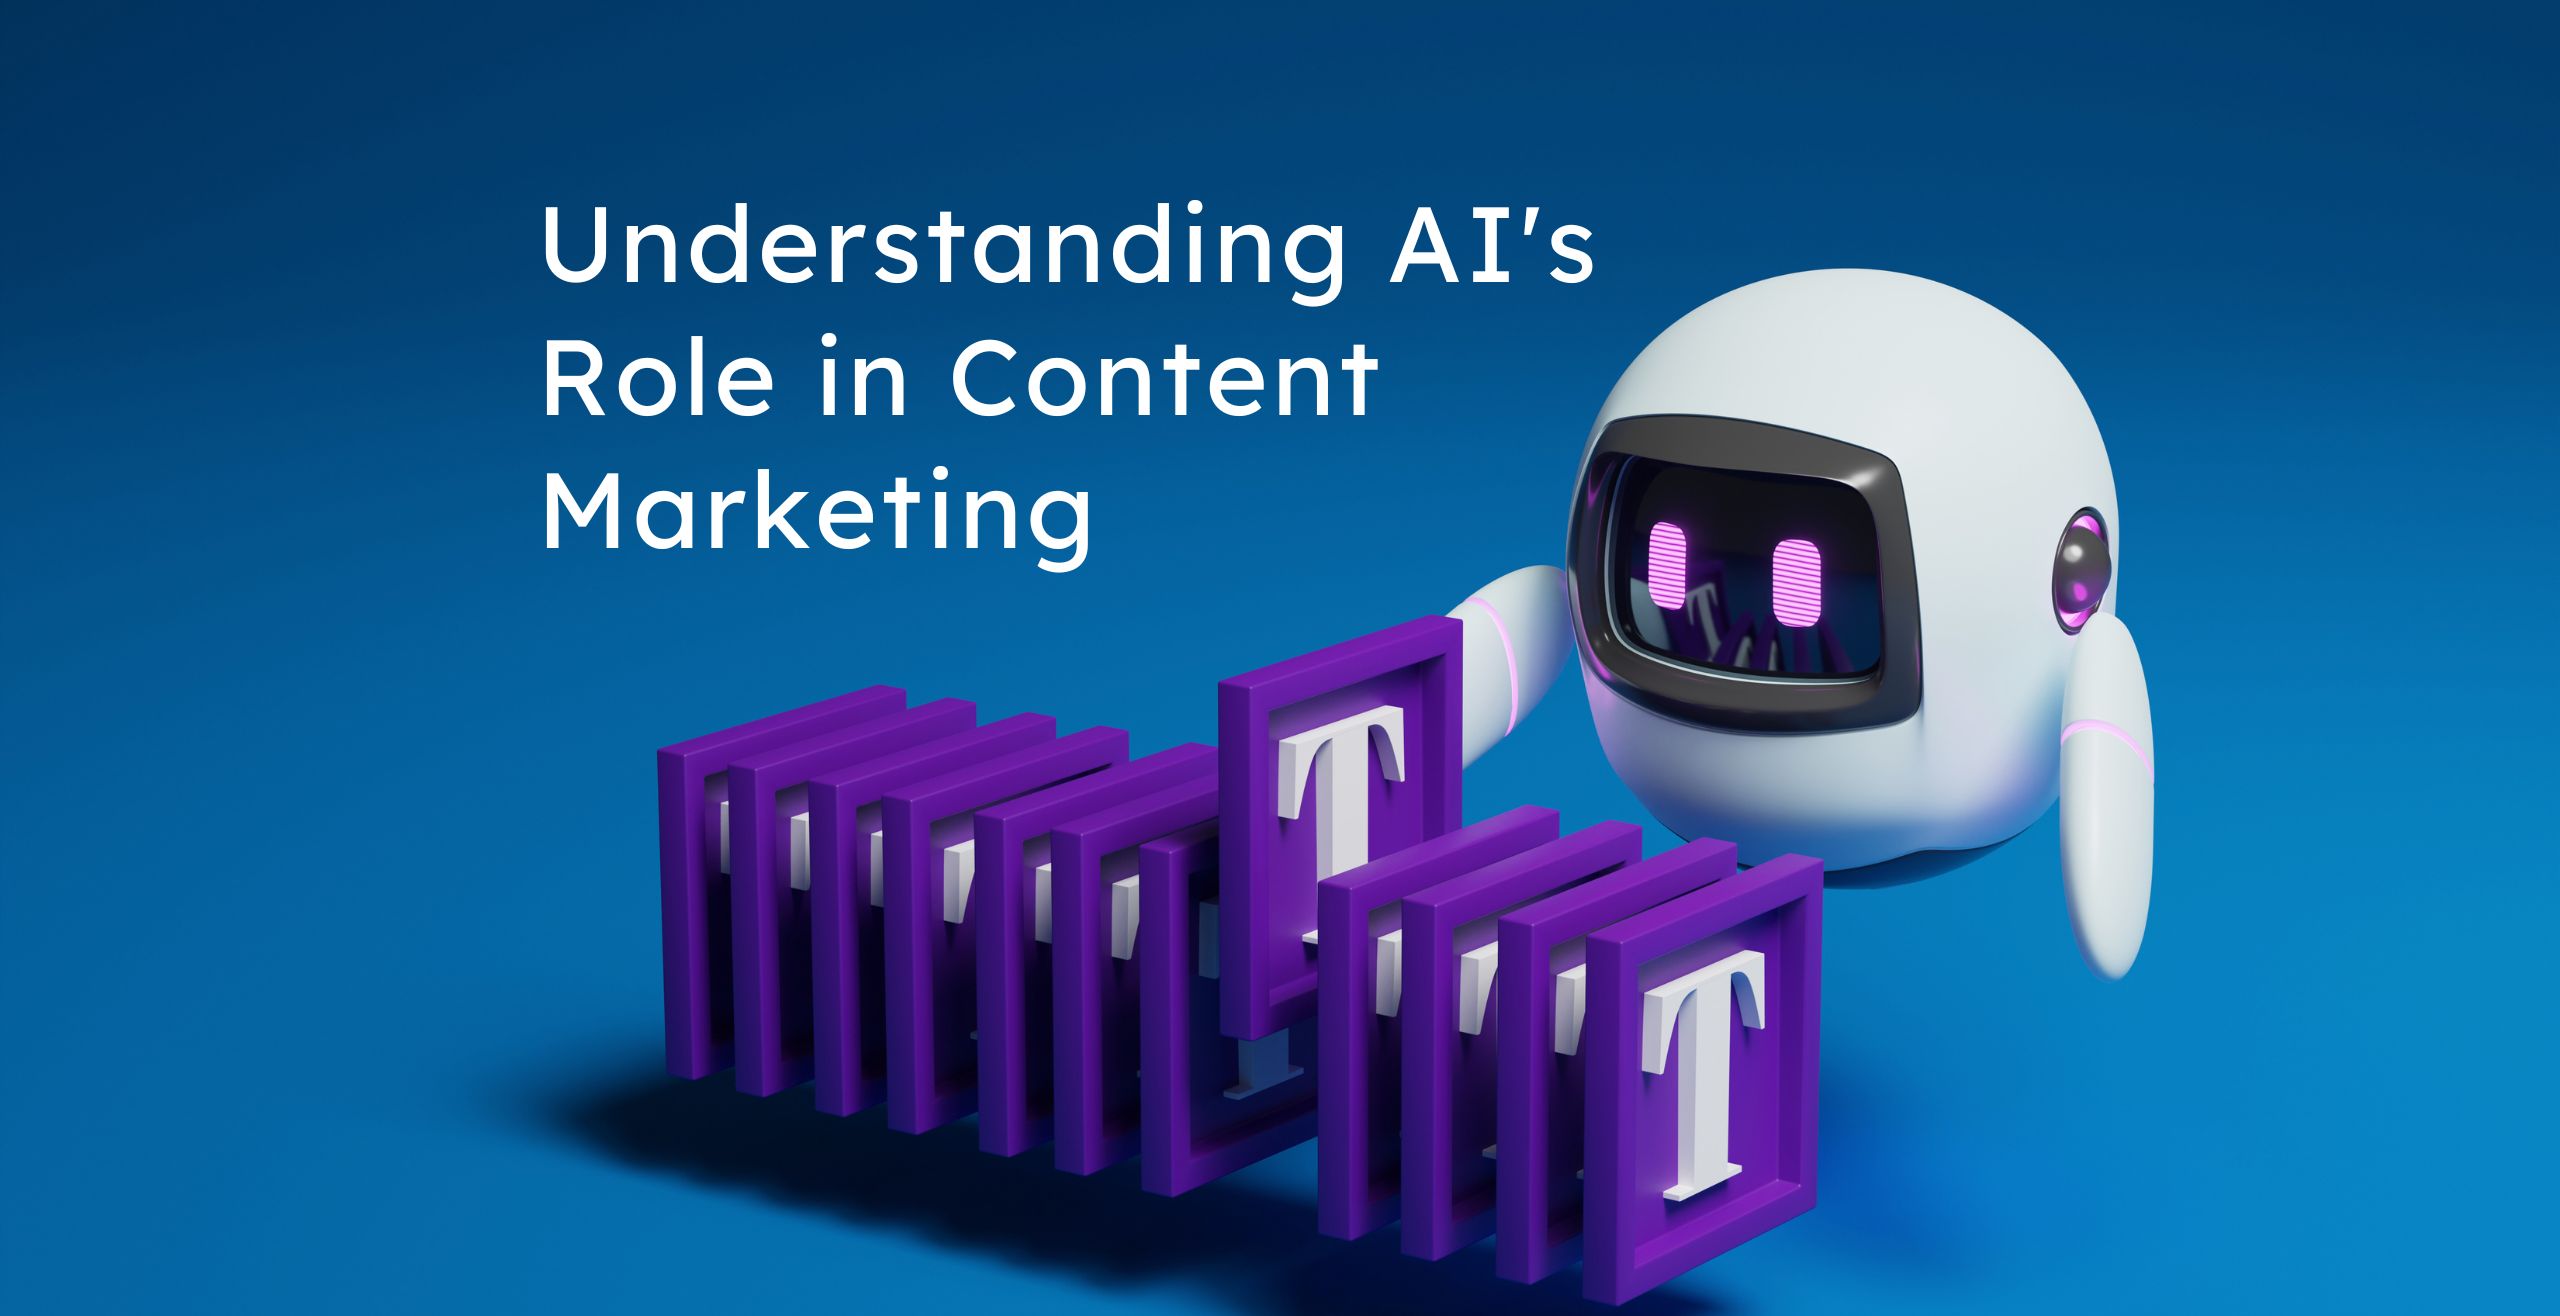 How AI is Reshaping the Content Marketing Landscape: From Hype to Reality